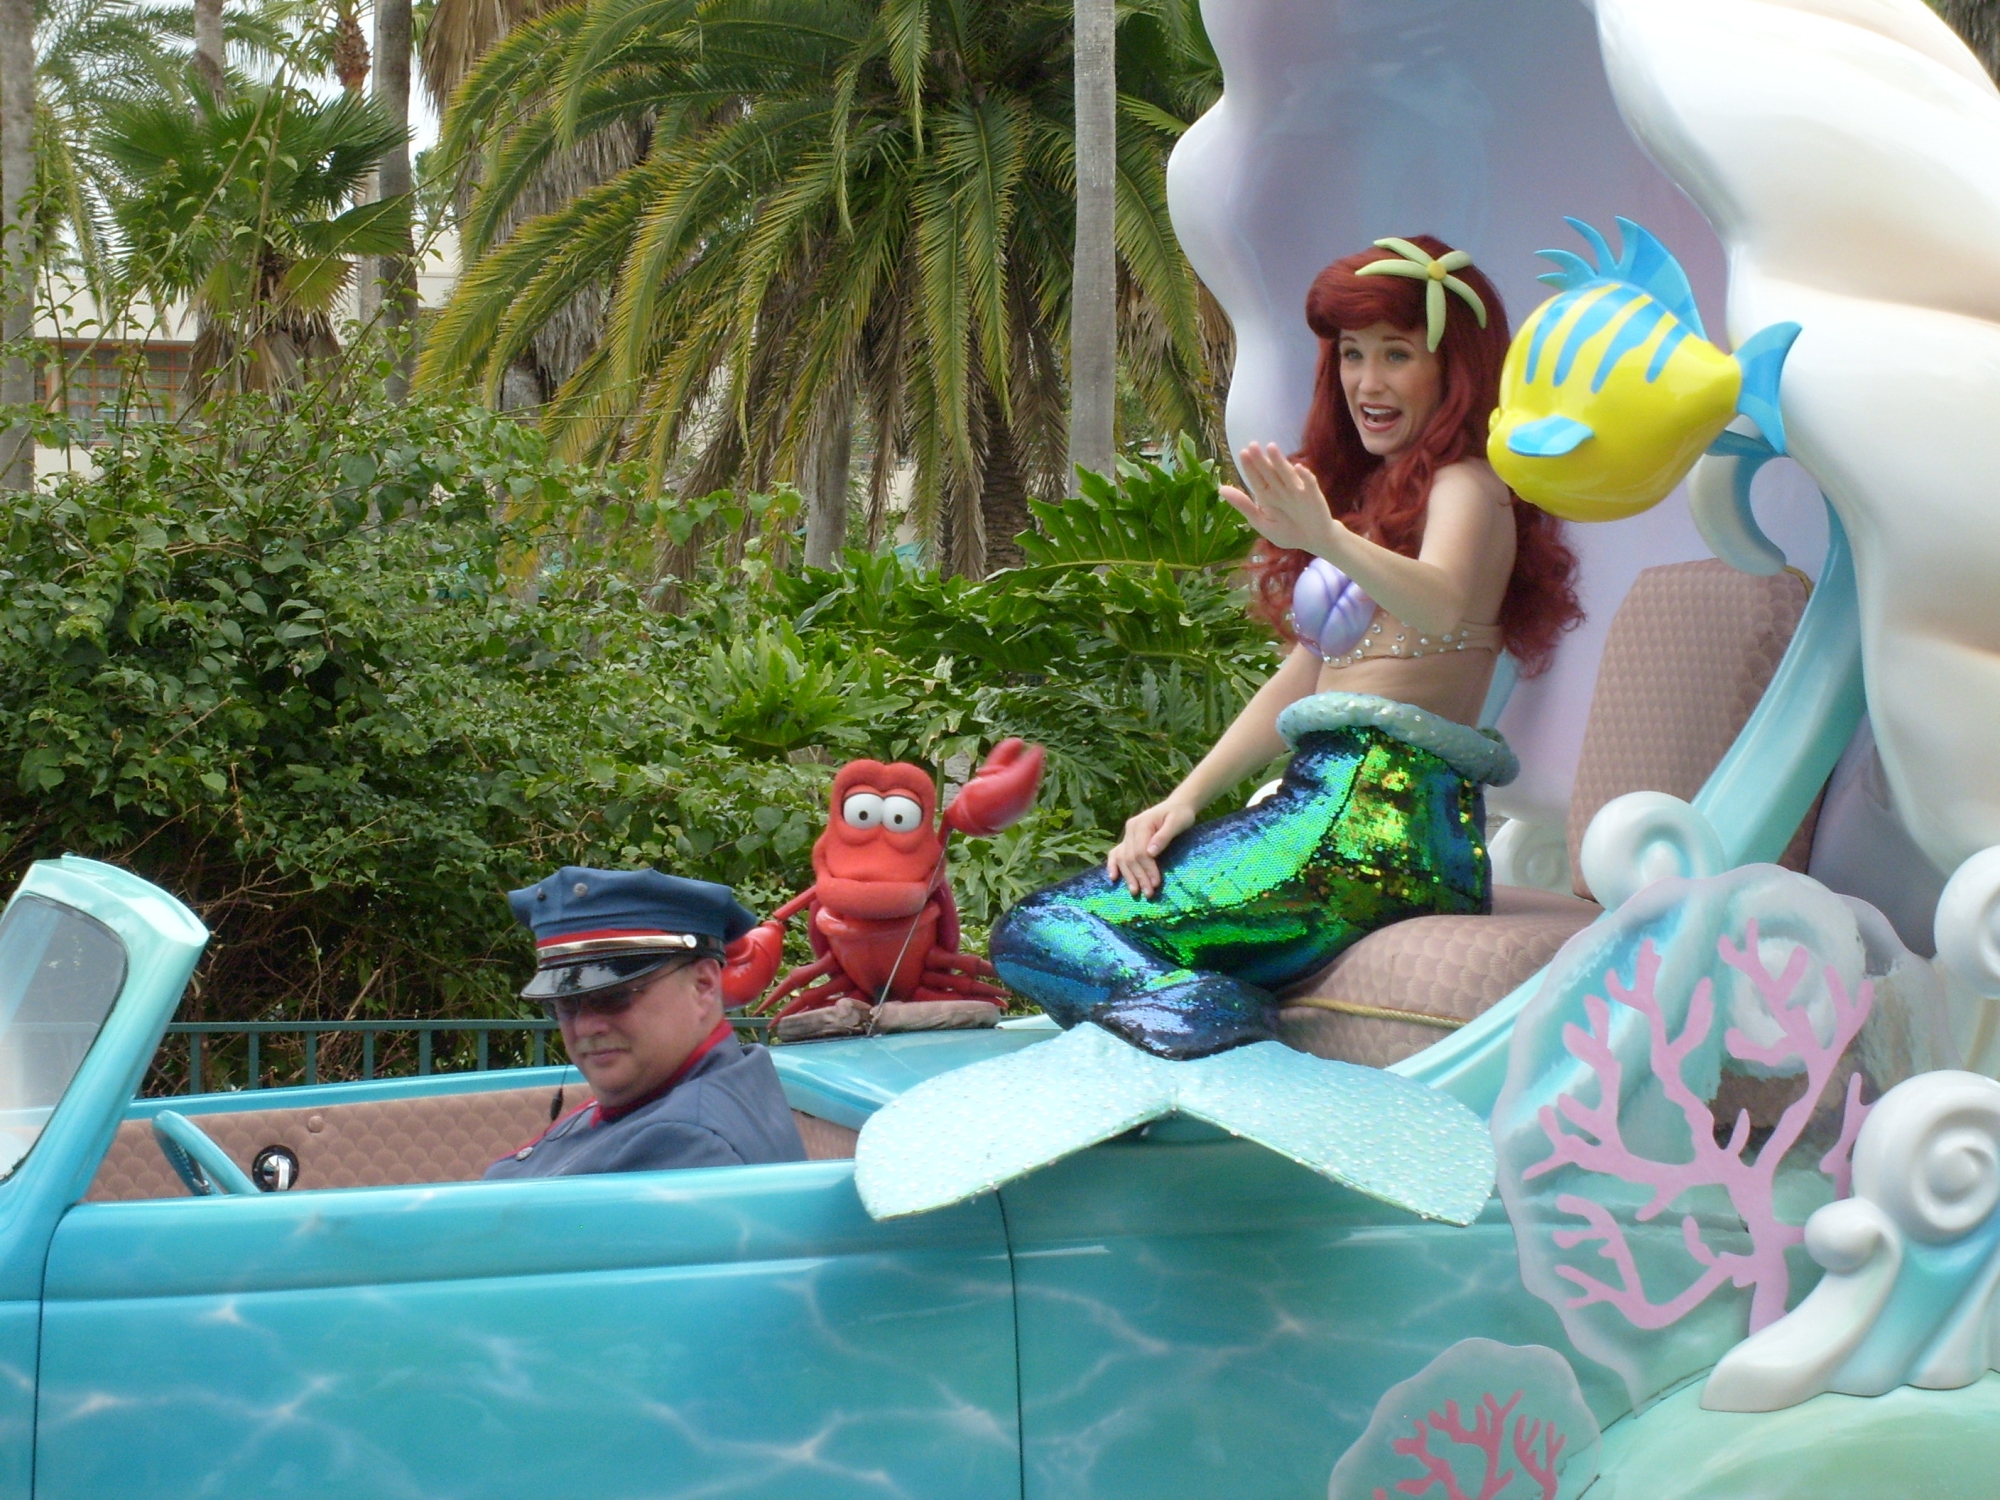 Hollywood Studios--Stars and Motor Cars Parade--Ariel and friends